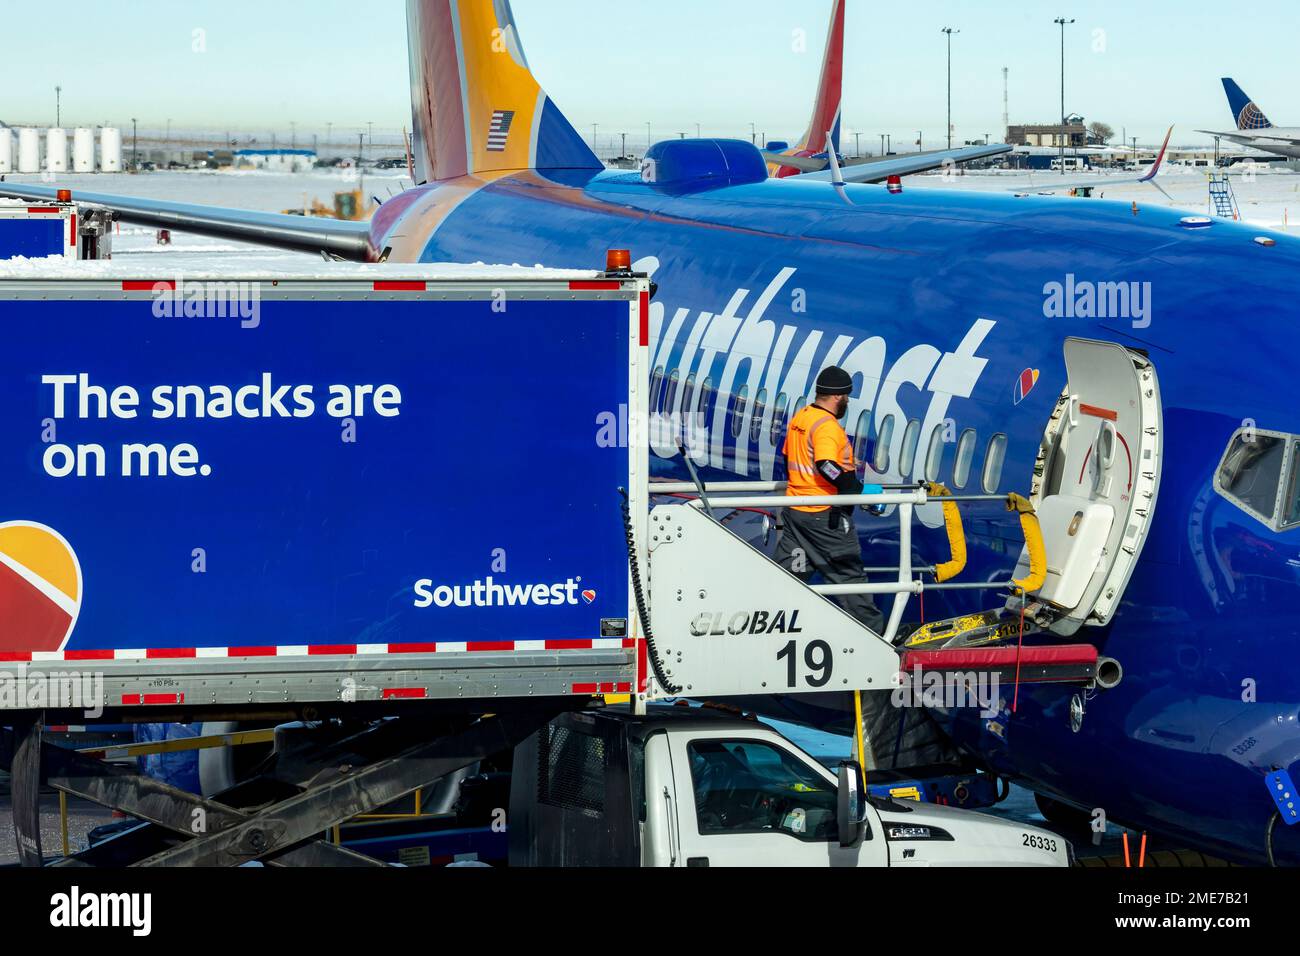 Denver, Colorado - Southwest Airlines jets on the ground after a snowstorm at Denver International Airport. A food service worker loads snacks onto a Stock Photo